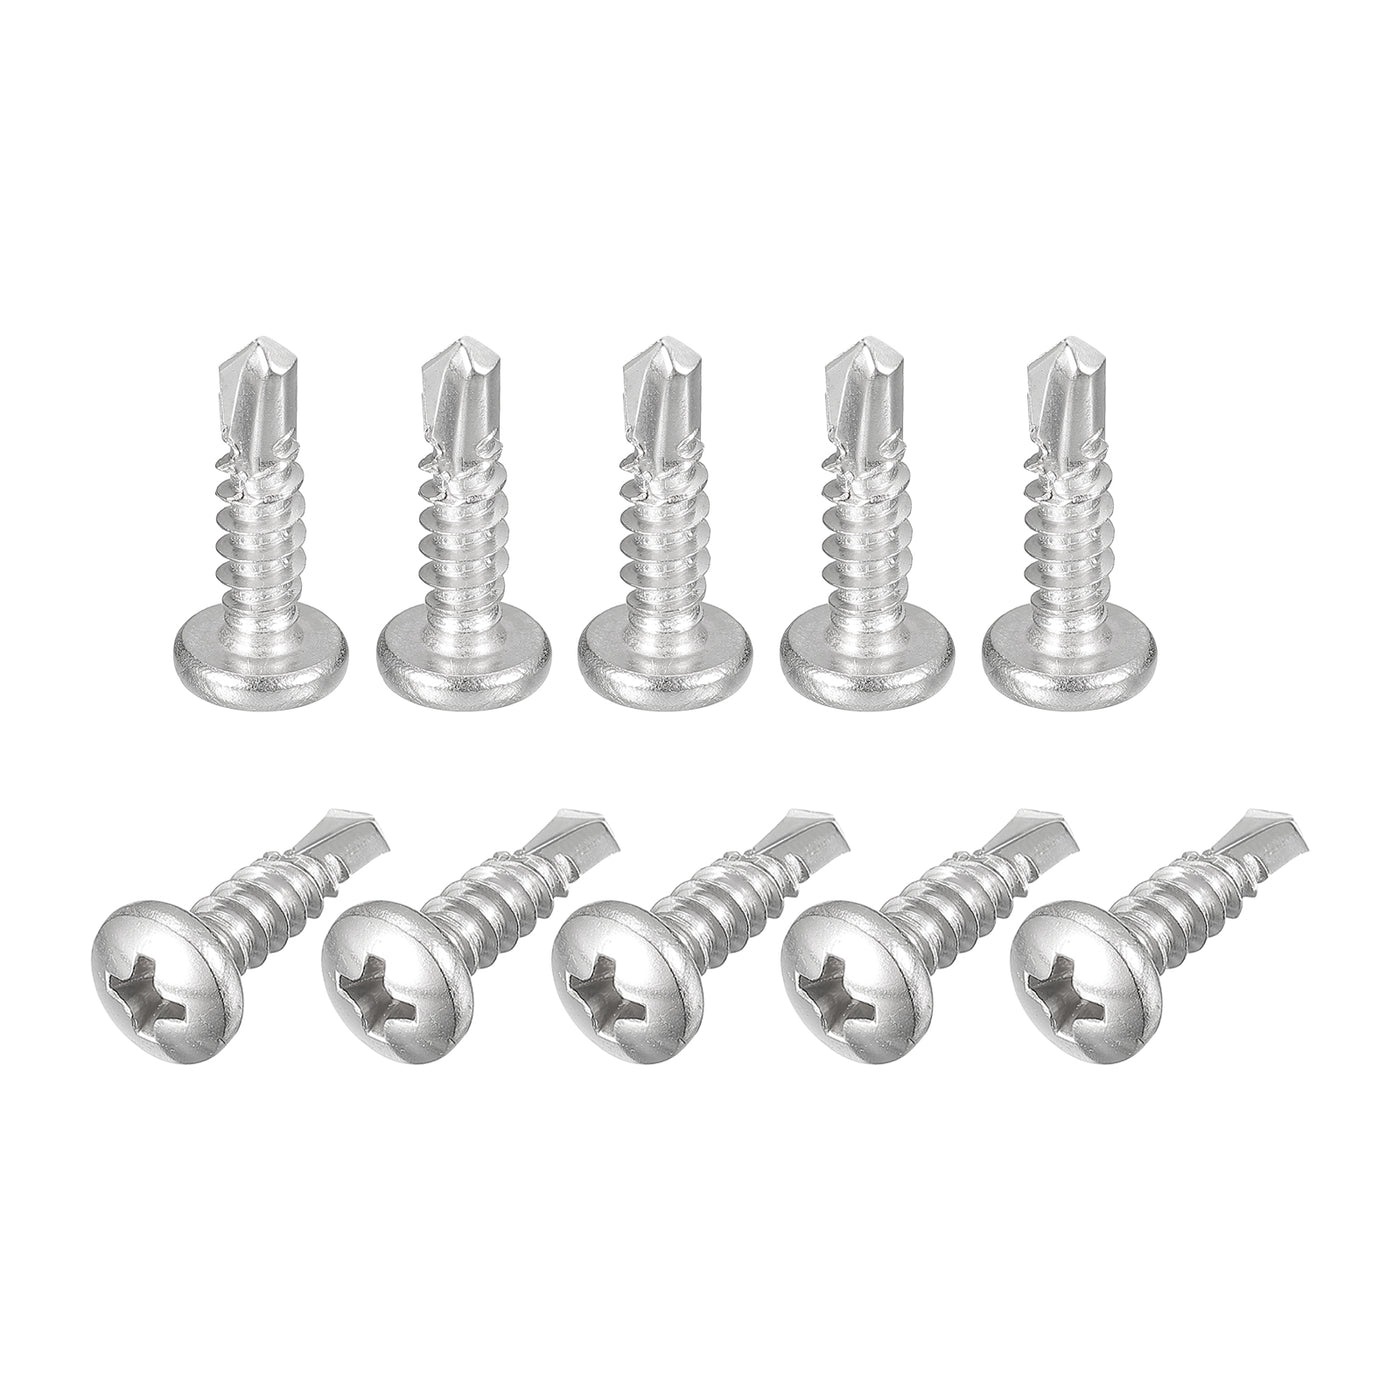 uxcell Uxcell #10 x 3/4" Self Drilling Screws, 20pcs Phillips Pan Head Self Tapping Screws